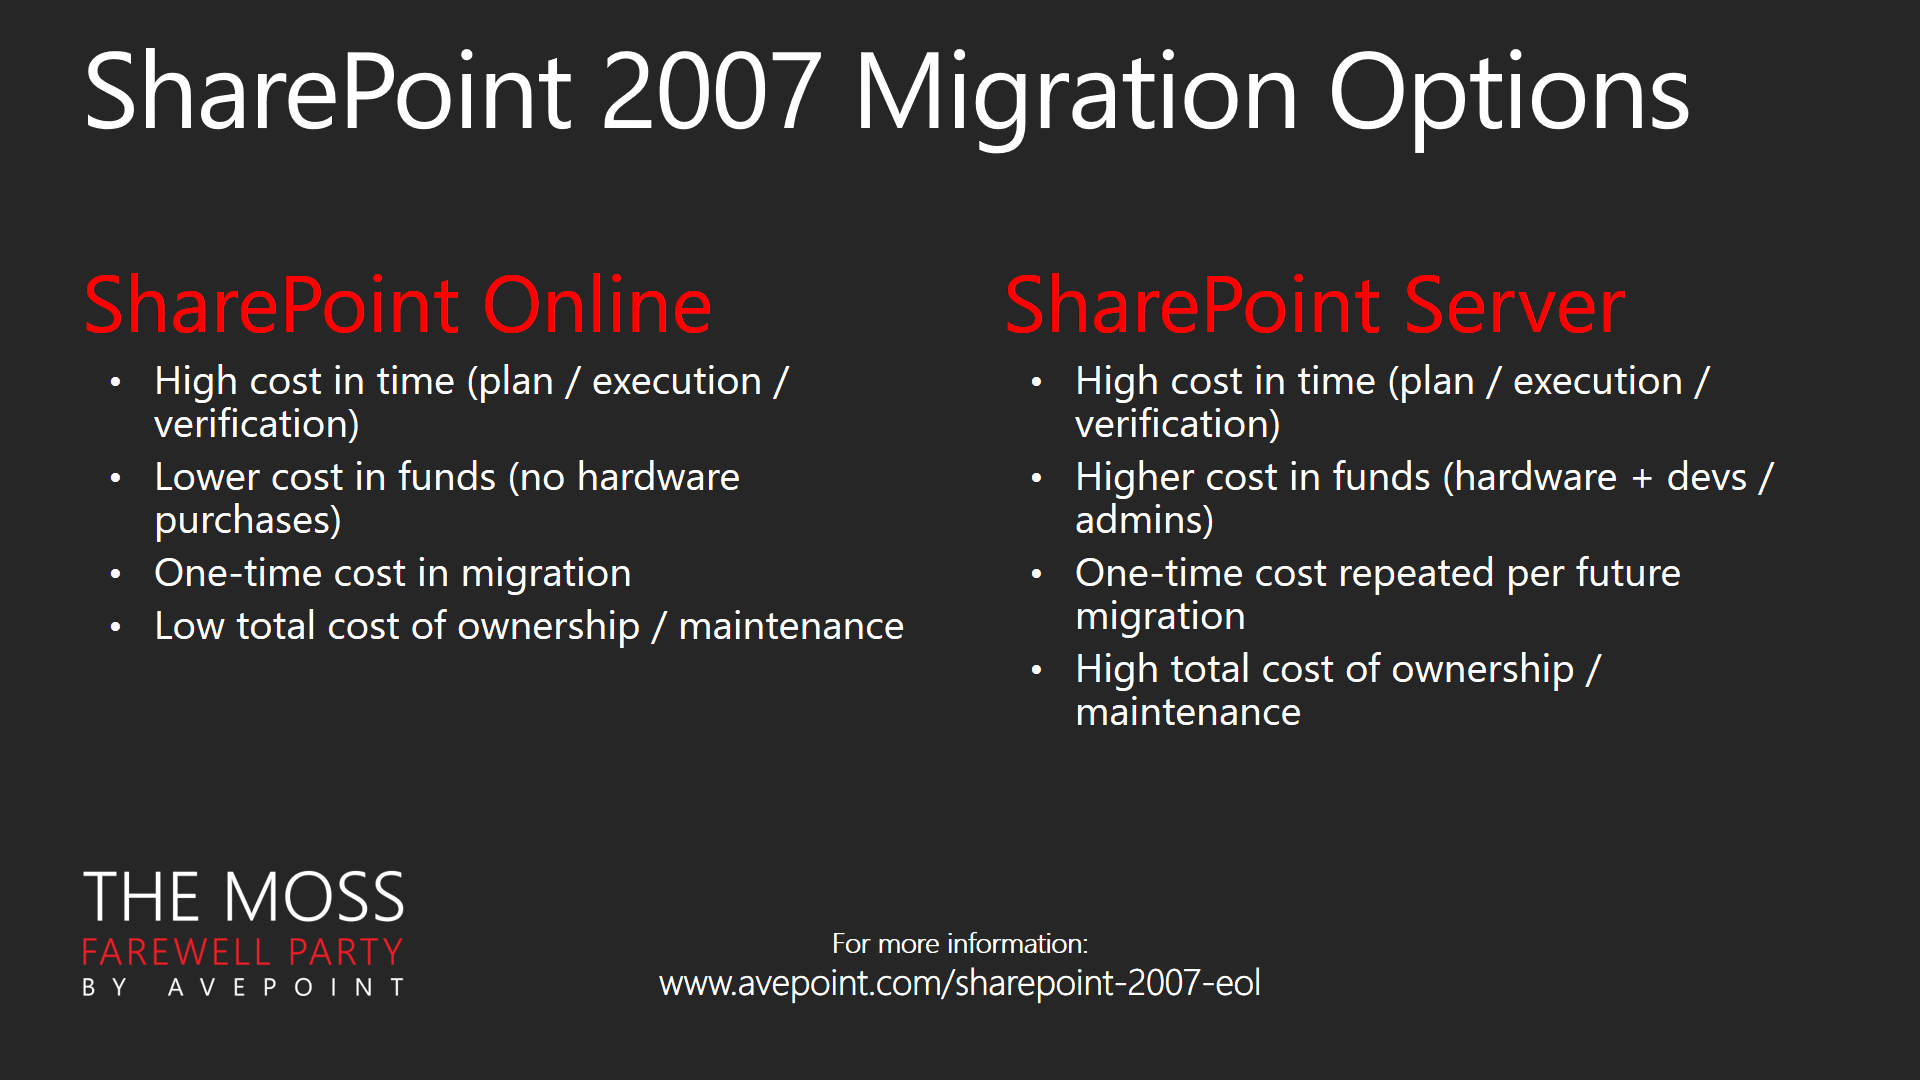 SharePoint 2007 Migration considerations